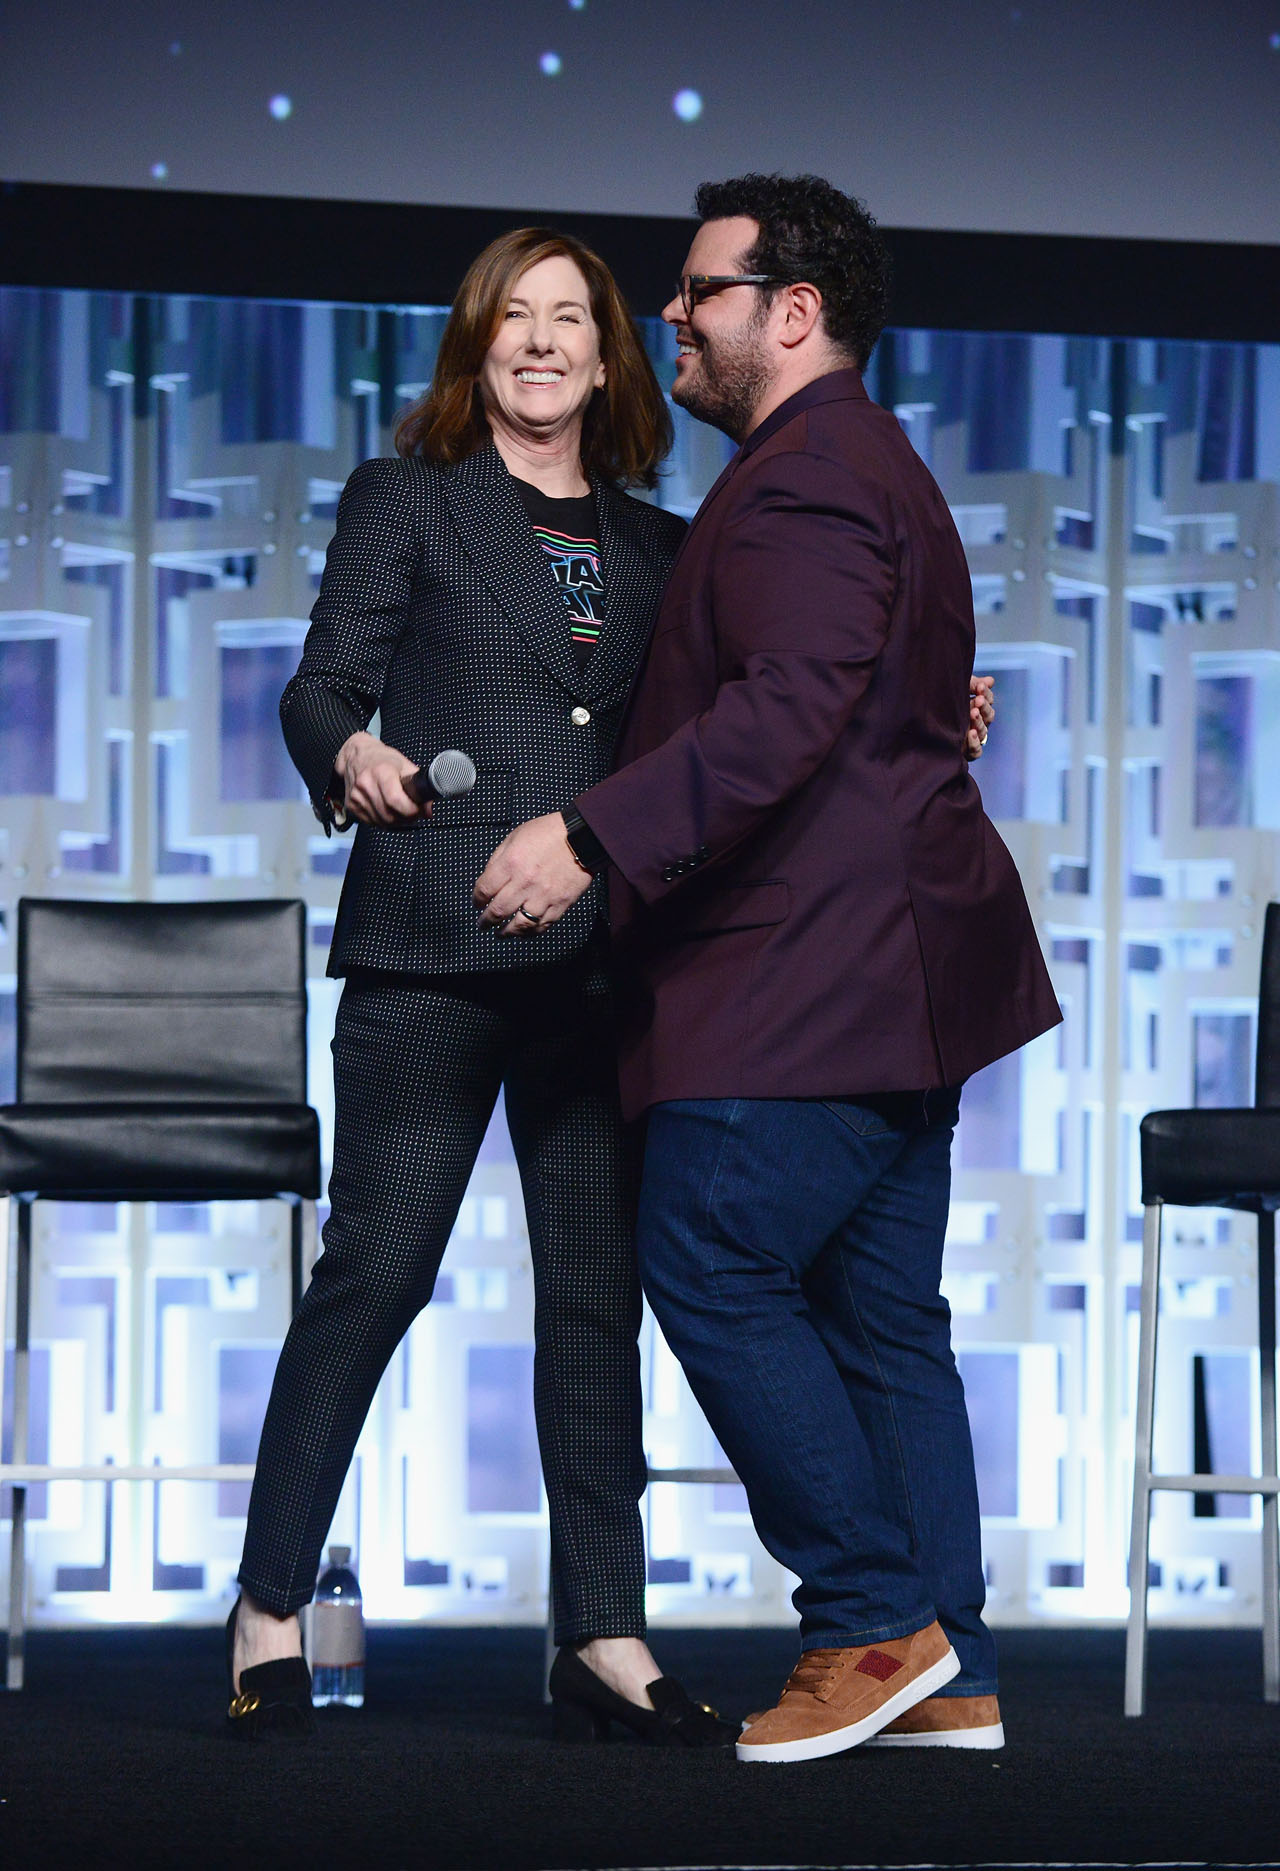 ORLANDO, FL - APRIL 14: Kathleen Kennedy and Josh Gad attend the STAR WARS: THE LAST JEDI PANEL during the 2017 STAR WARS CELEBRATION at Orange County Convention Center on April 14, 2017 in Orlando, Florida.  (Photo by Gerardo Mora/Getty Images for Disney) *** Local Caption *** Kathleen Kennedy;Josh Gad